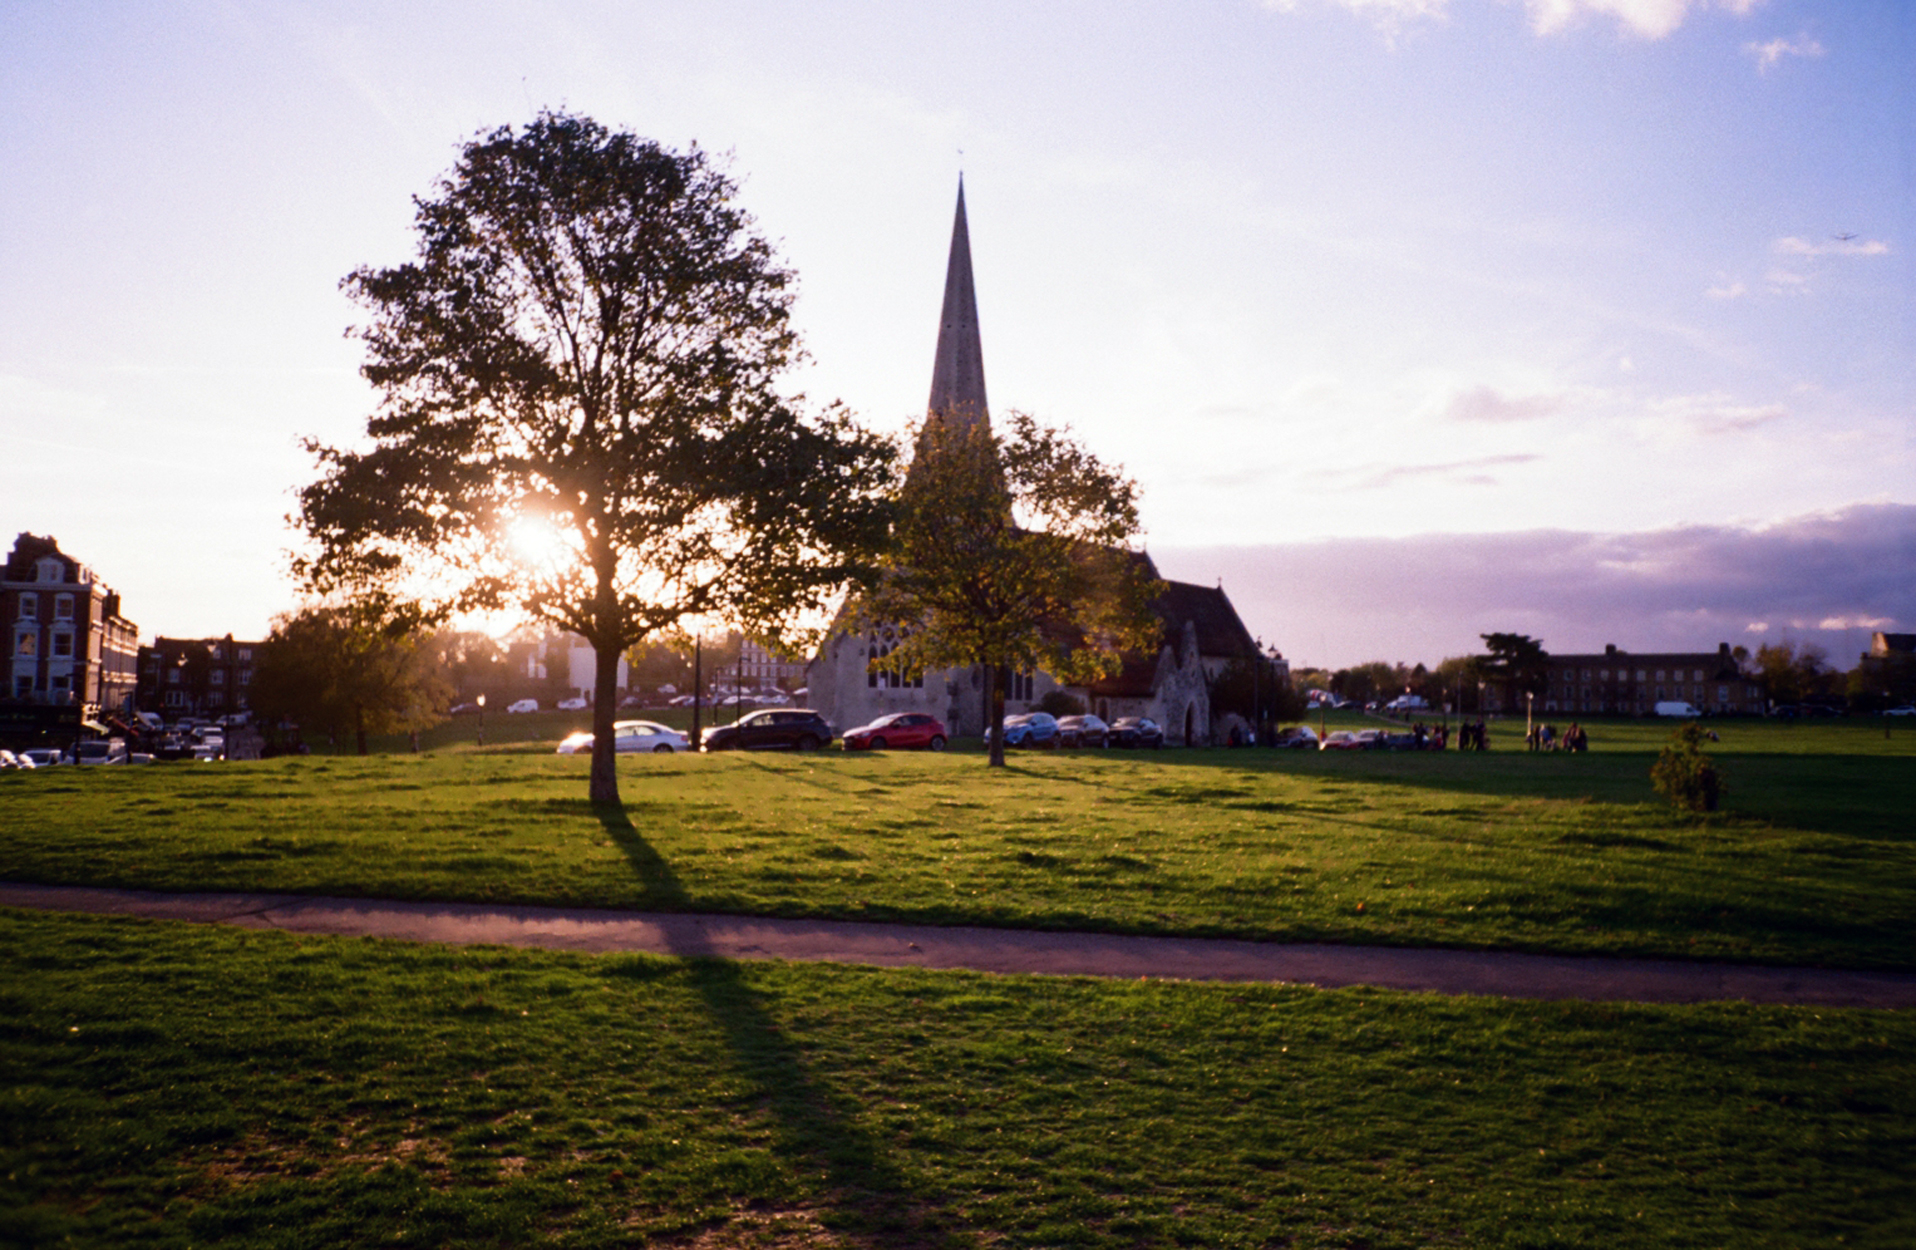 Blackheath winter dusk with tree and church (Pic: Stephen Dowling)